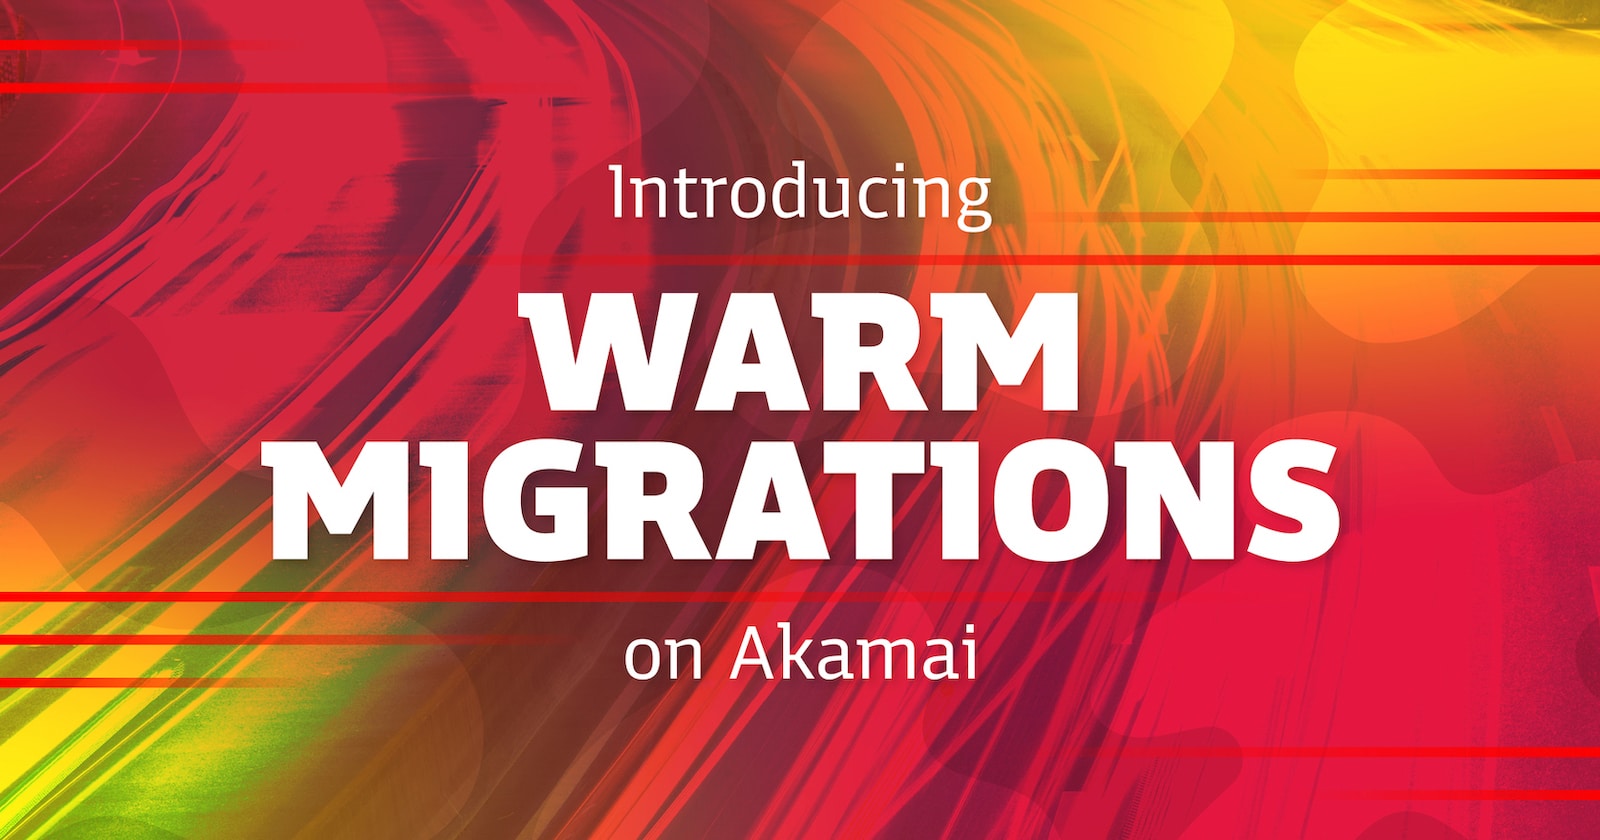 Introducing Warm Migrations on Akamai featured image.